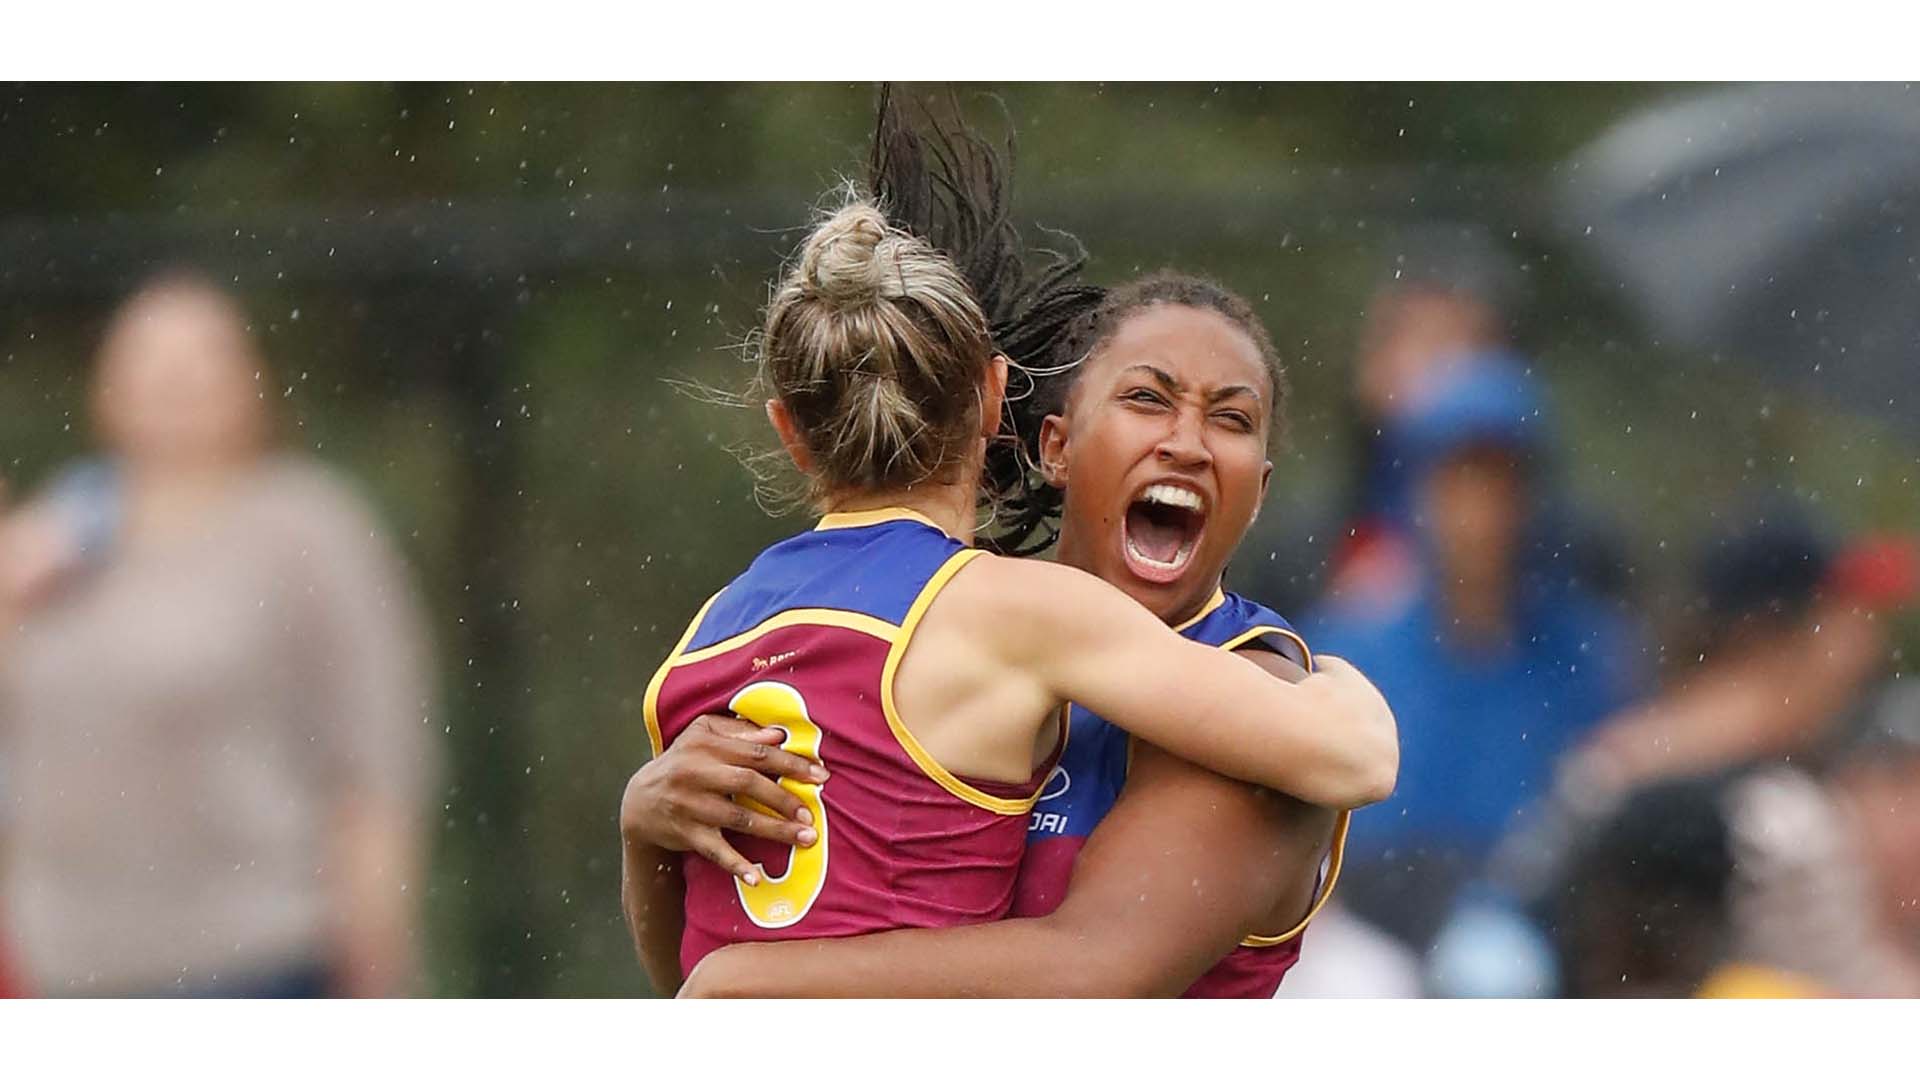 MELBOURNE, AUSTRALIA - FEBRUARY 5: Kate McCarthy and Sabrina Frederick-Traub of the Lions (right) celebrate during the 2017 AFLW Round 01 match between the Melbourne Demons and the Brisbane Lions at Casey Fields on February 5, 2017 in Melbourne, Australia. (Photo by Michael Willson/AFL Media)